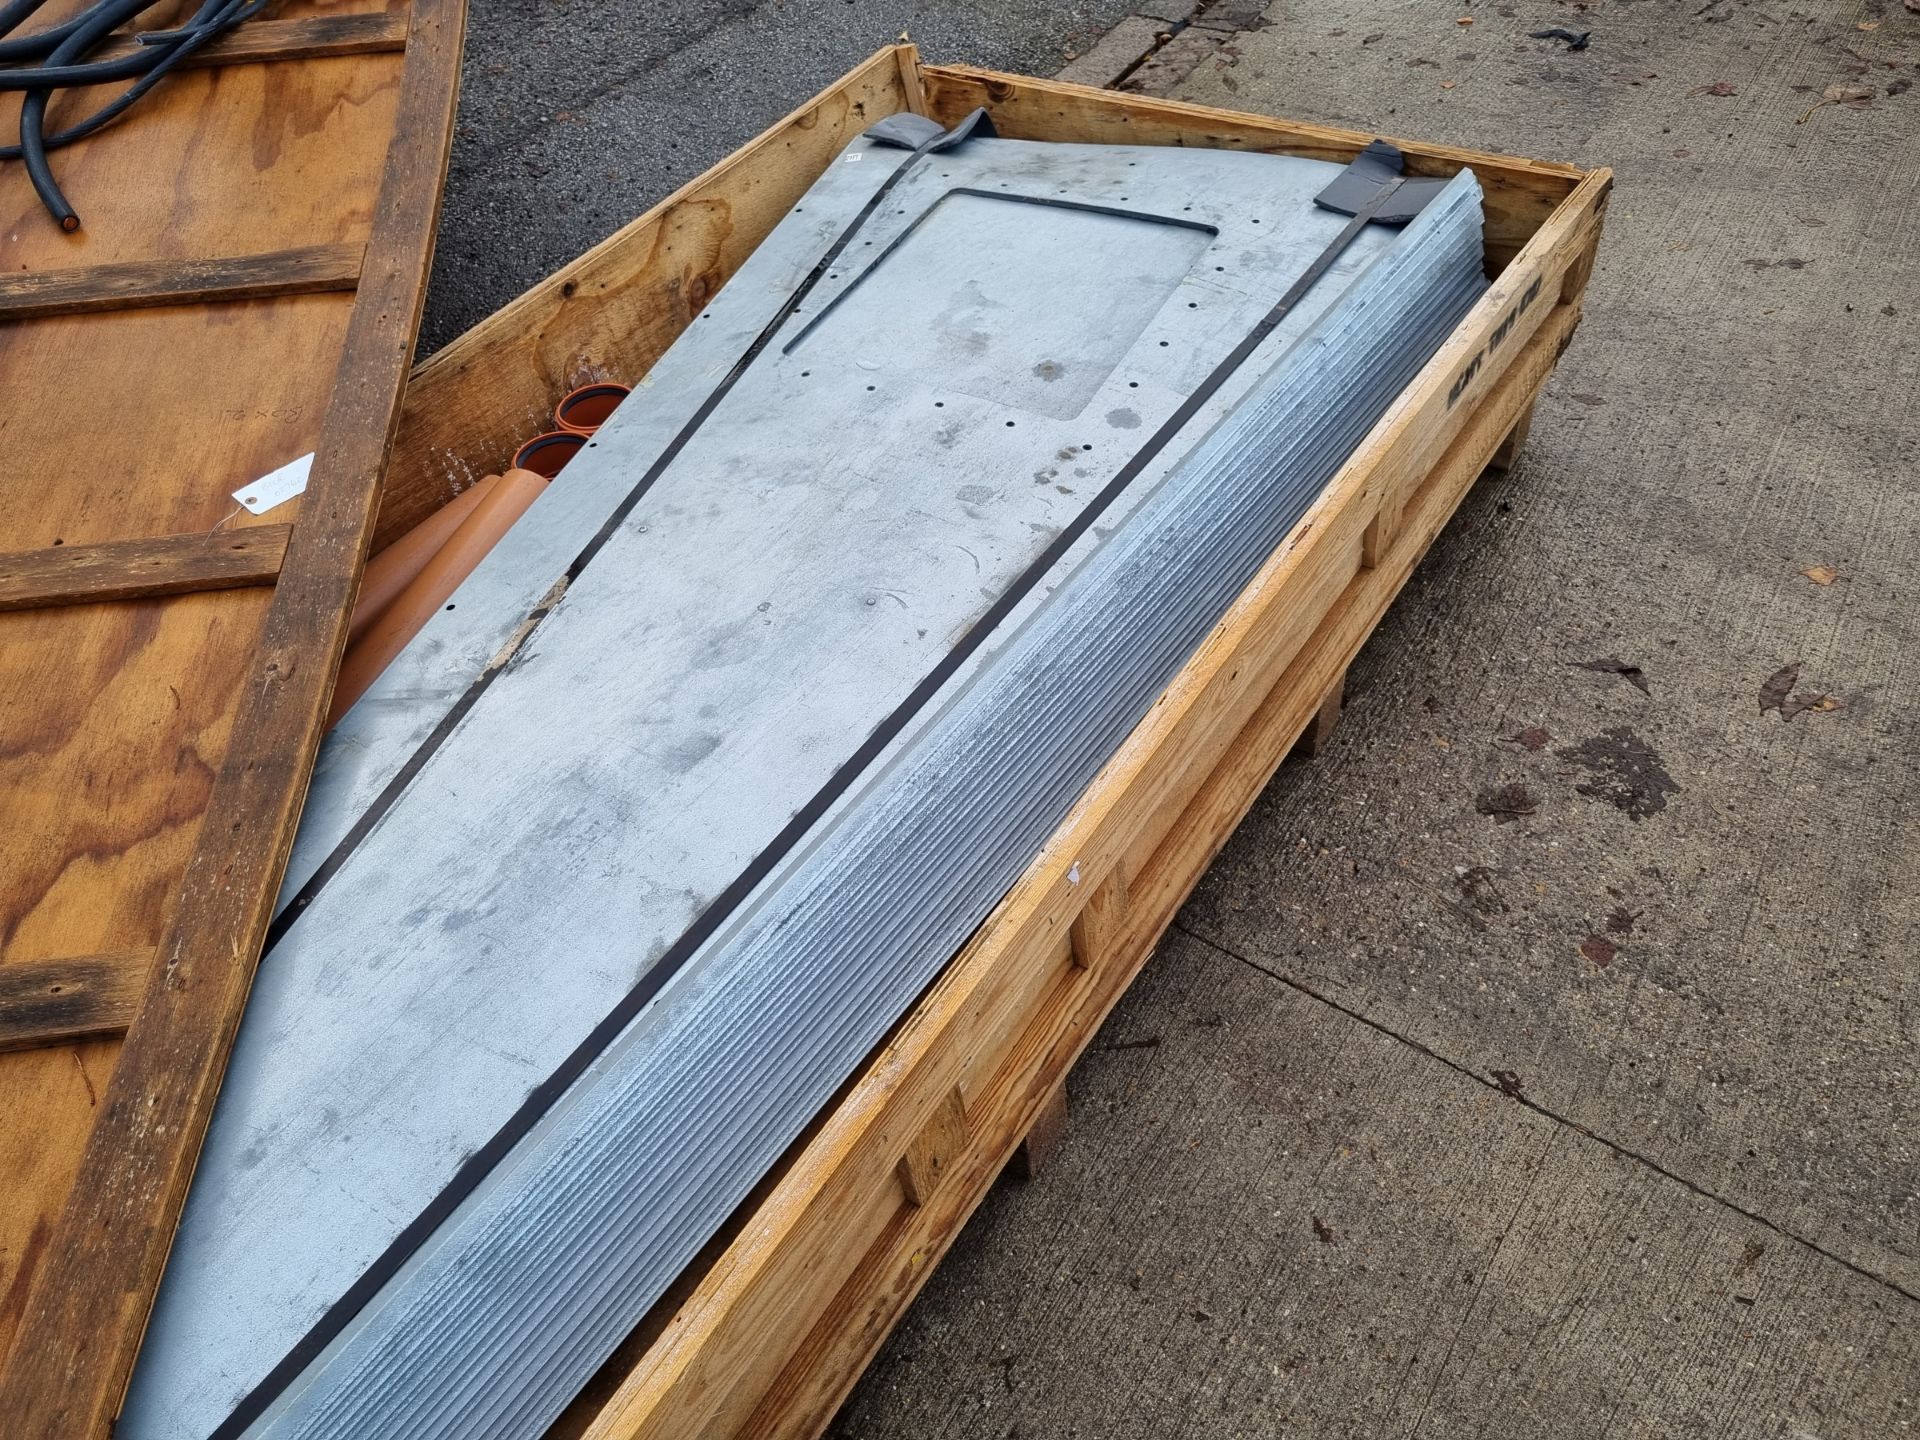 2x Roof Kits in crate - Image 6 of 6